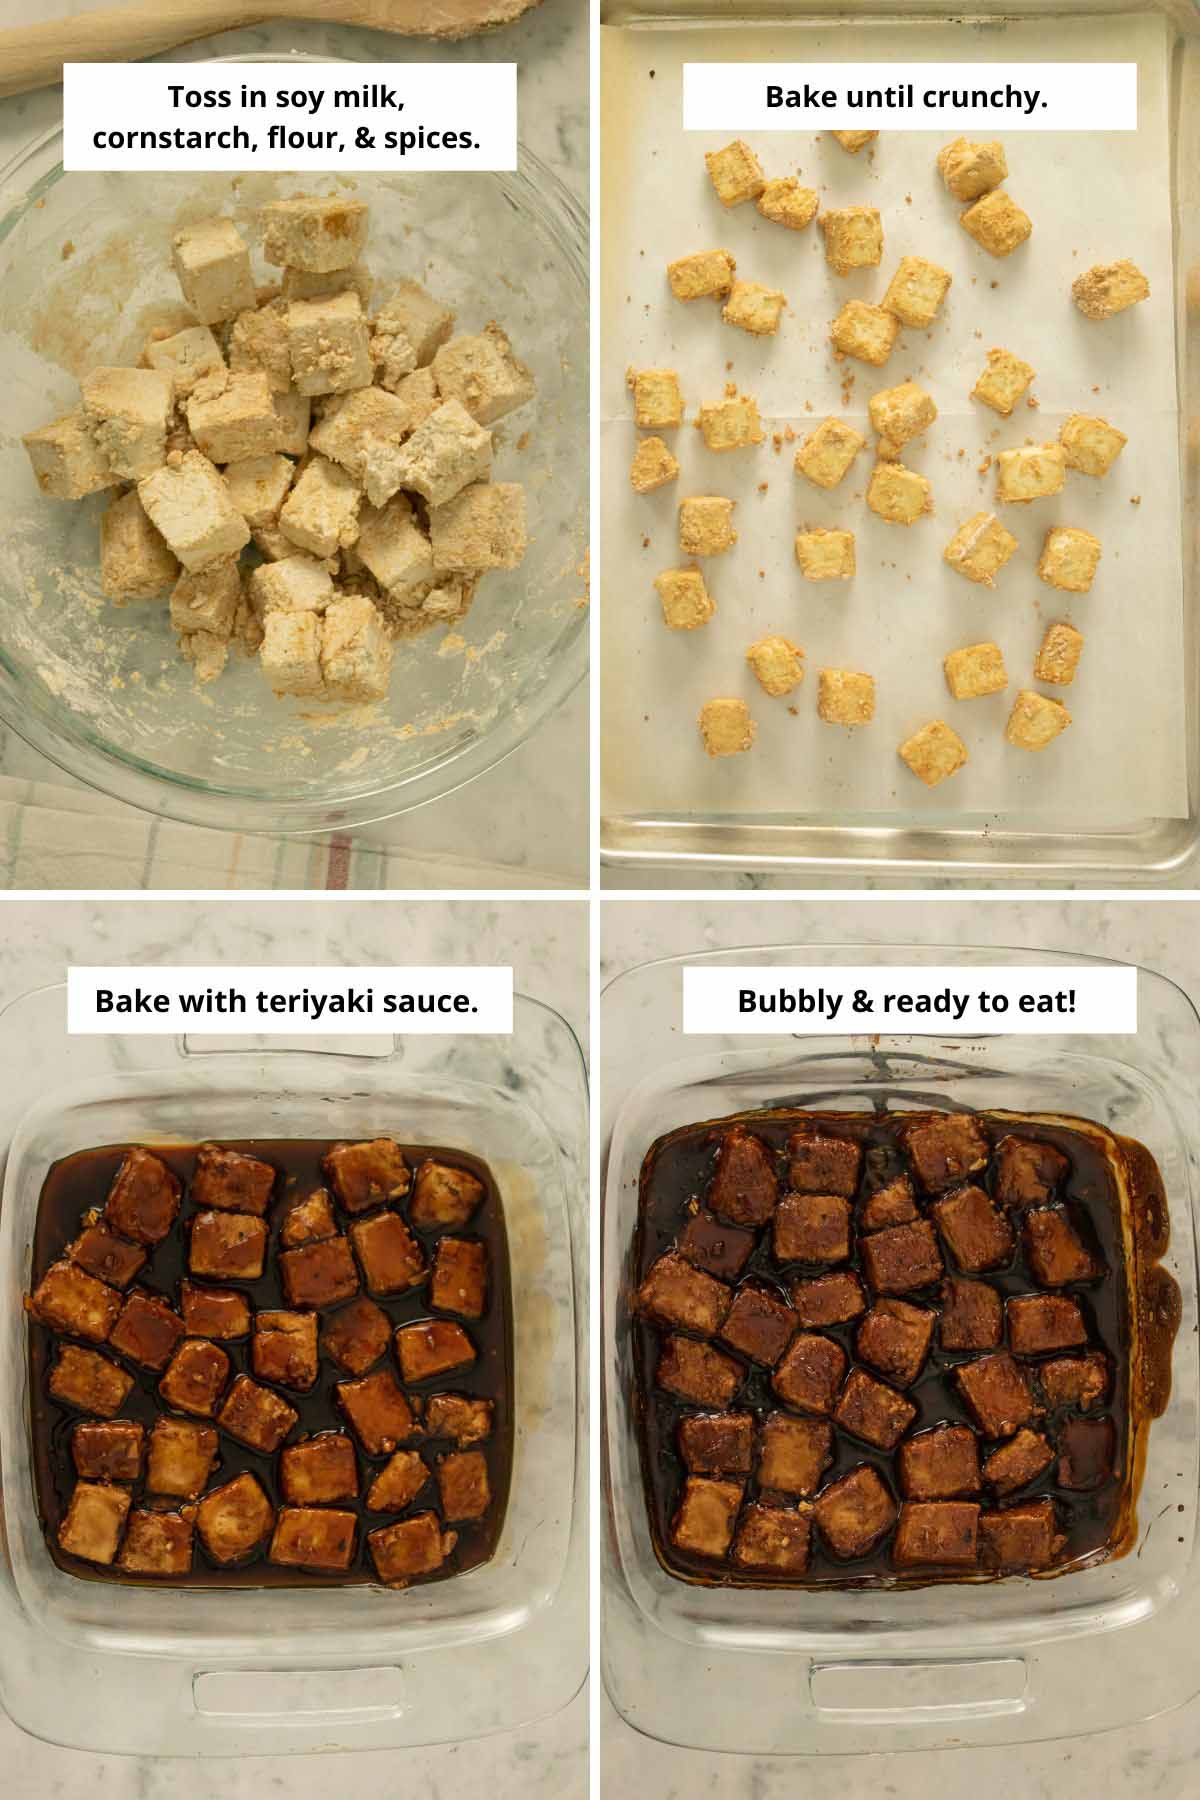 image collage showing the tofu tossed with flour, cornstarch, and spices; baked tofu on a baking sheet; and the tofu in the pan with teriyaki sauce before and after baking